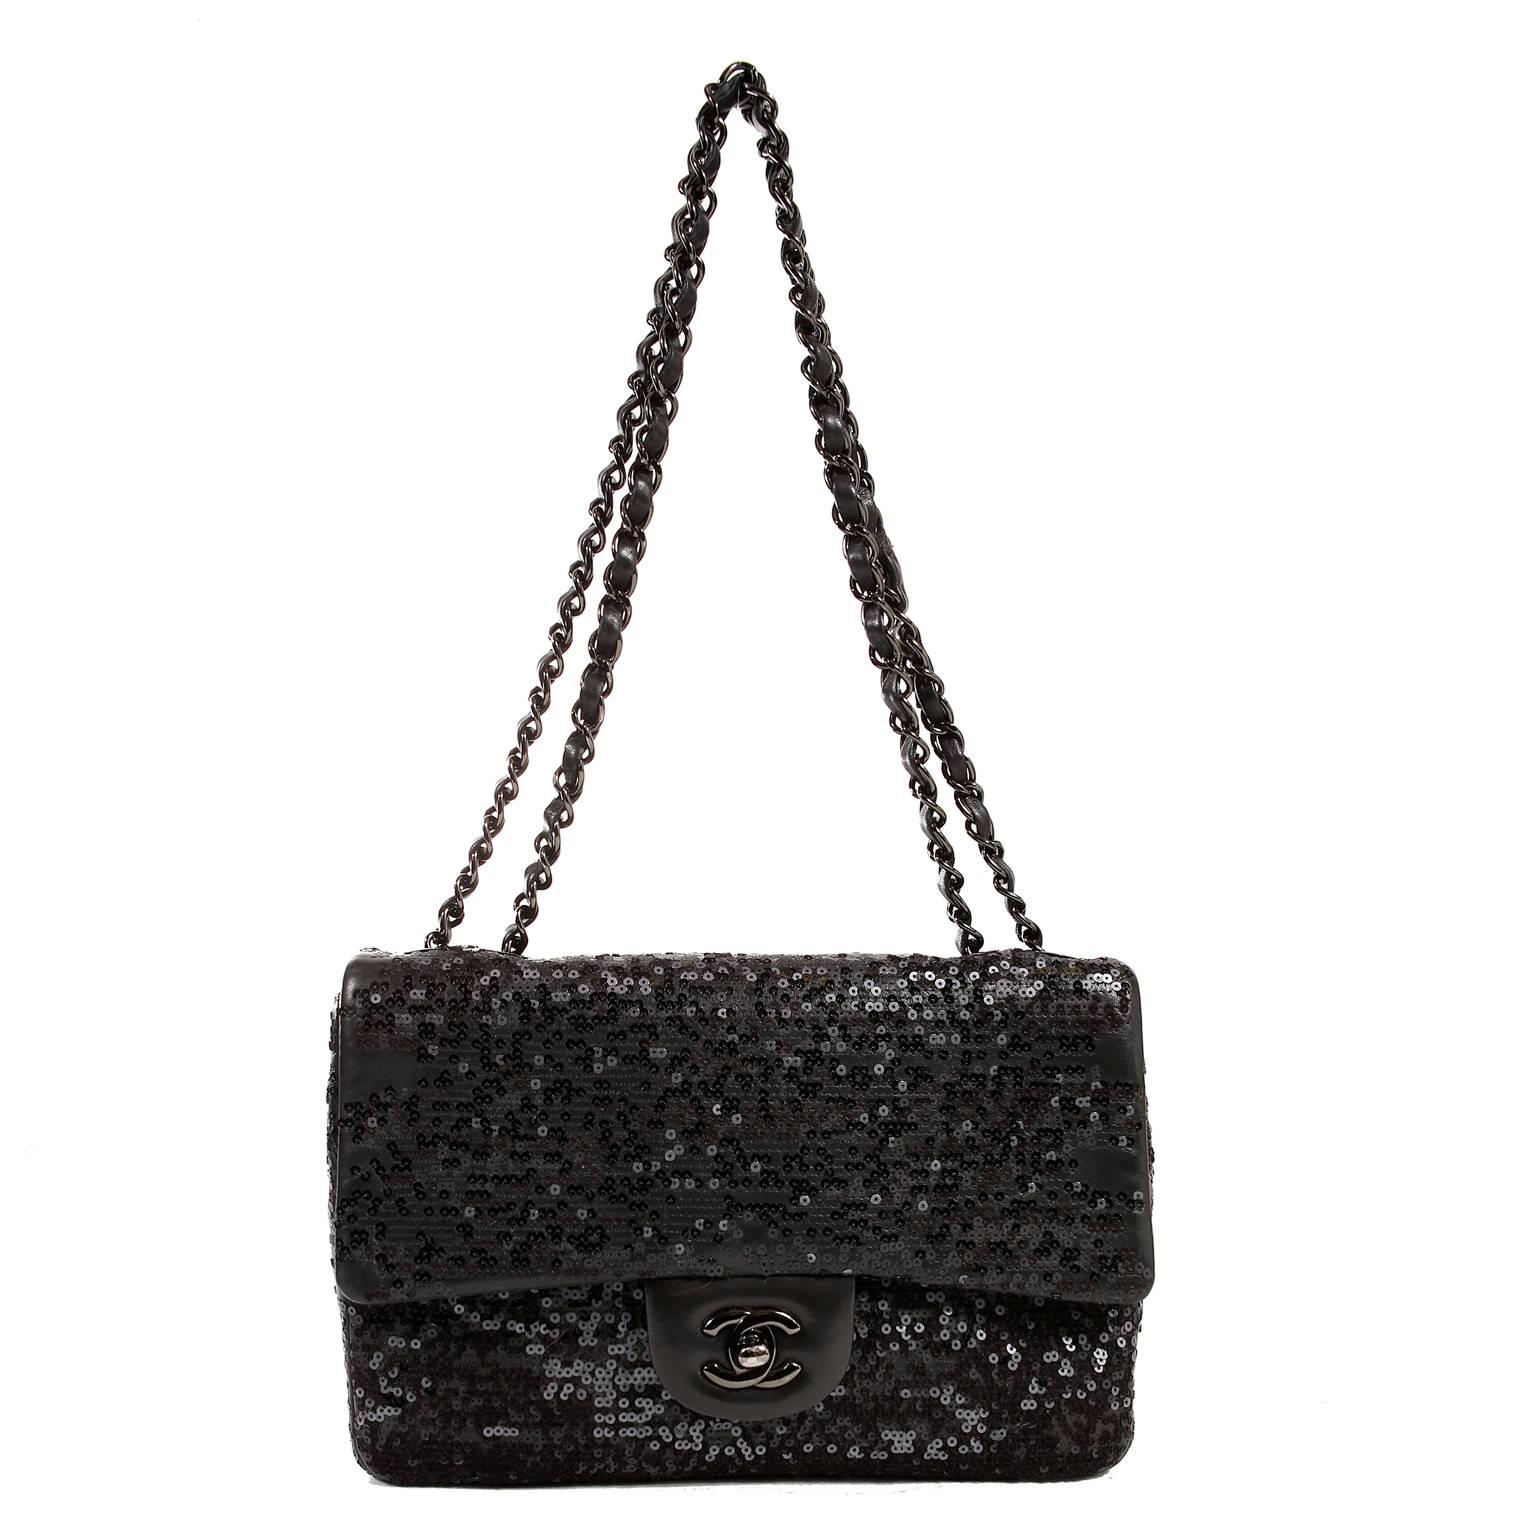 Chanel Black Sequin Single Flap Bag- PRISTINE
An ornamented version of the medium single flap, it is a brilliant addition to any collection.
Black leather single flap bag is covered in layers of black sequins.  Dark silver interlocking CC twist lock